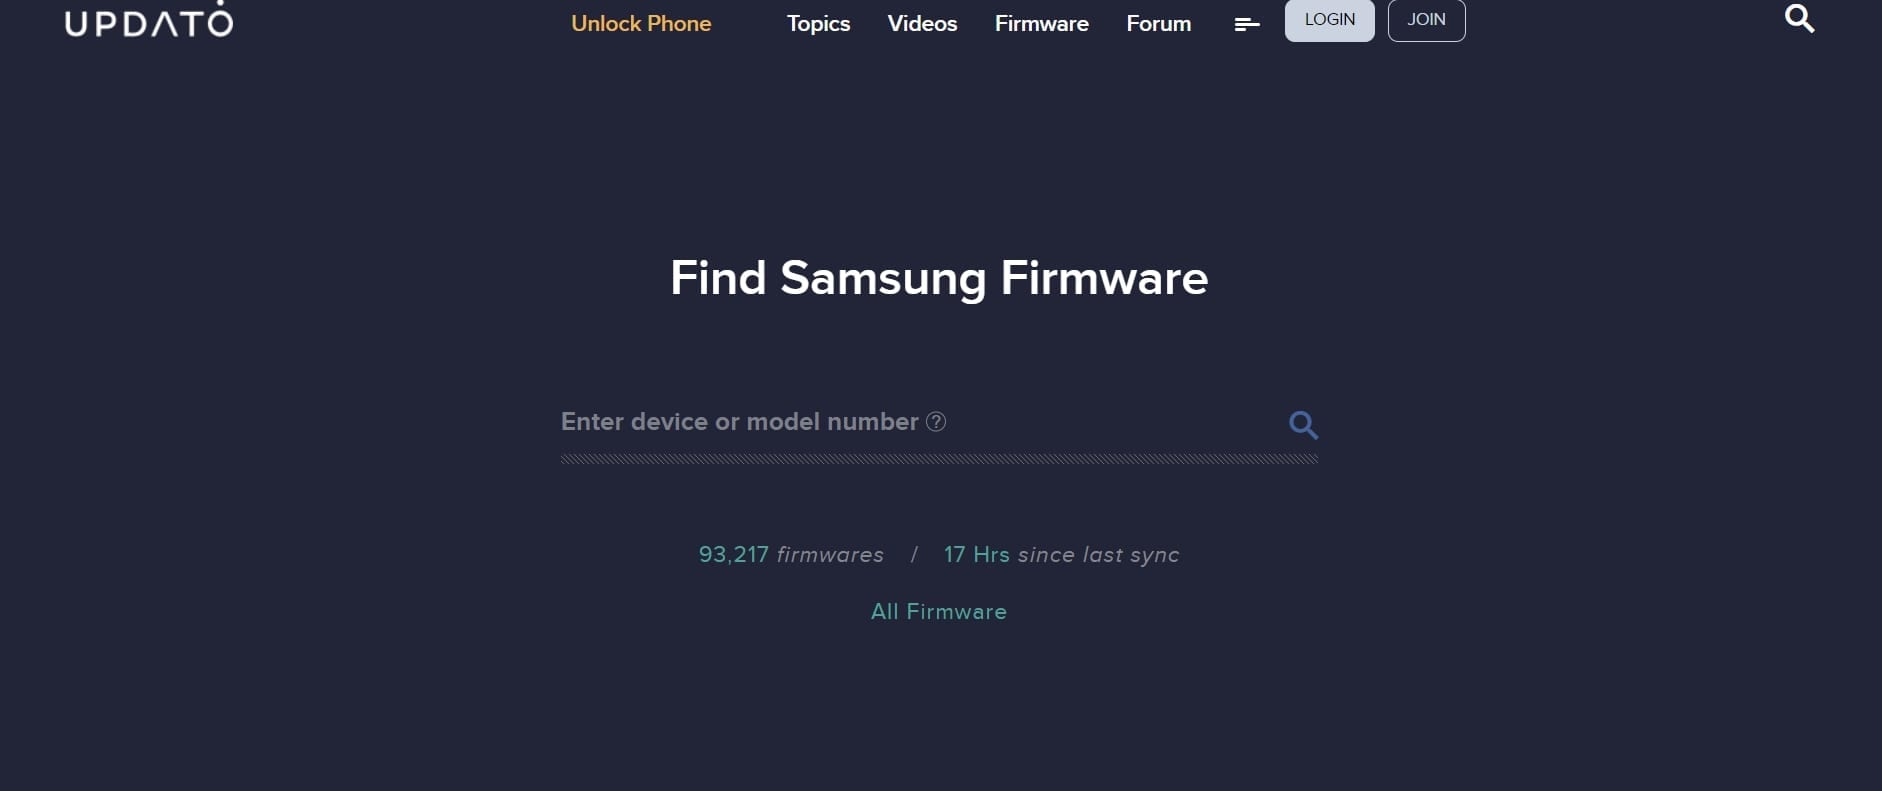 samsung firmware download with updato